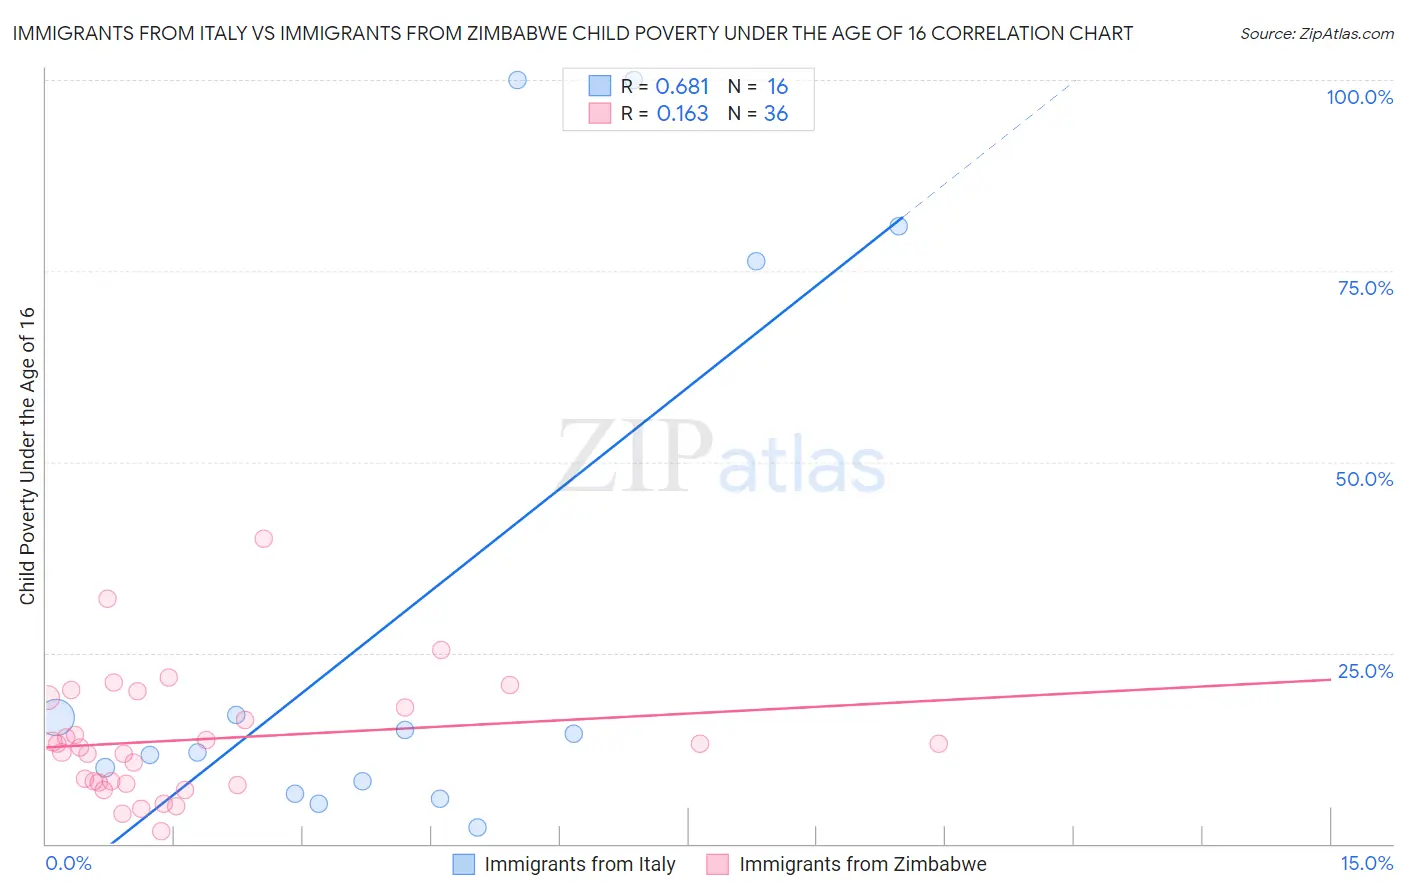 Immigrants from Italy vs Immigrants from Zimbabwe Child Poverty Under the Age of 16